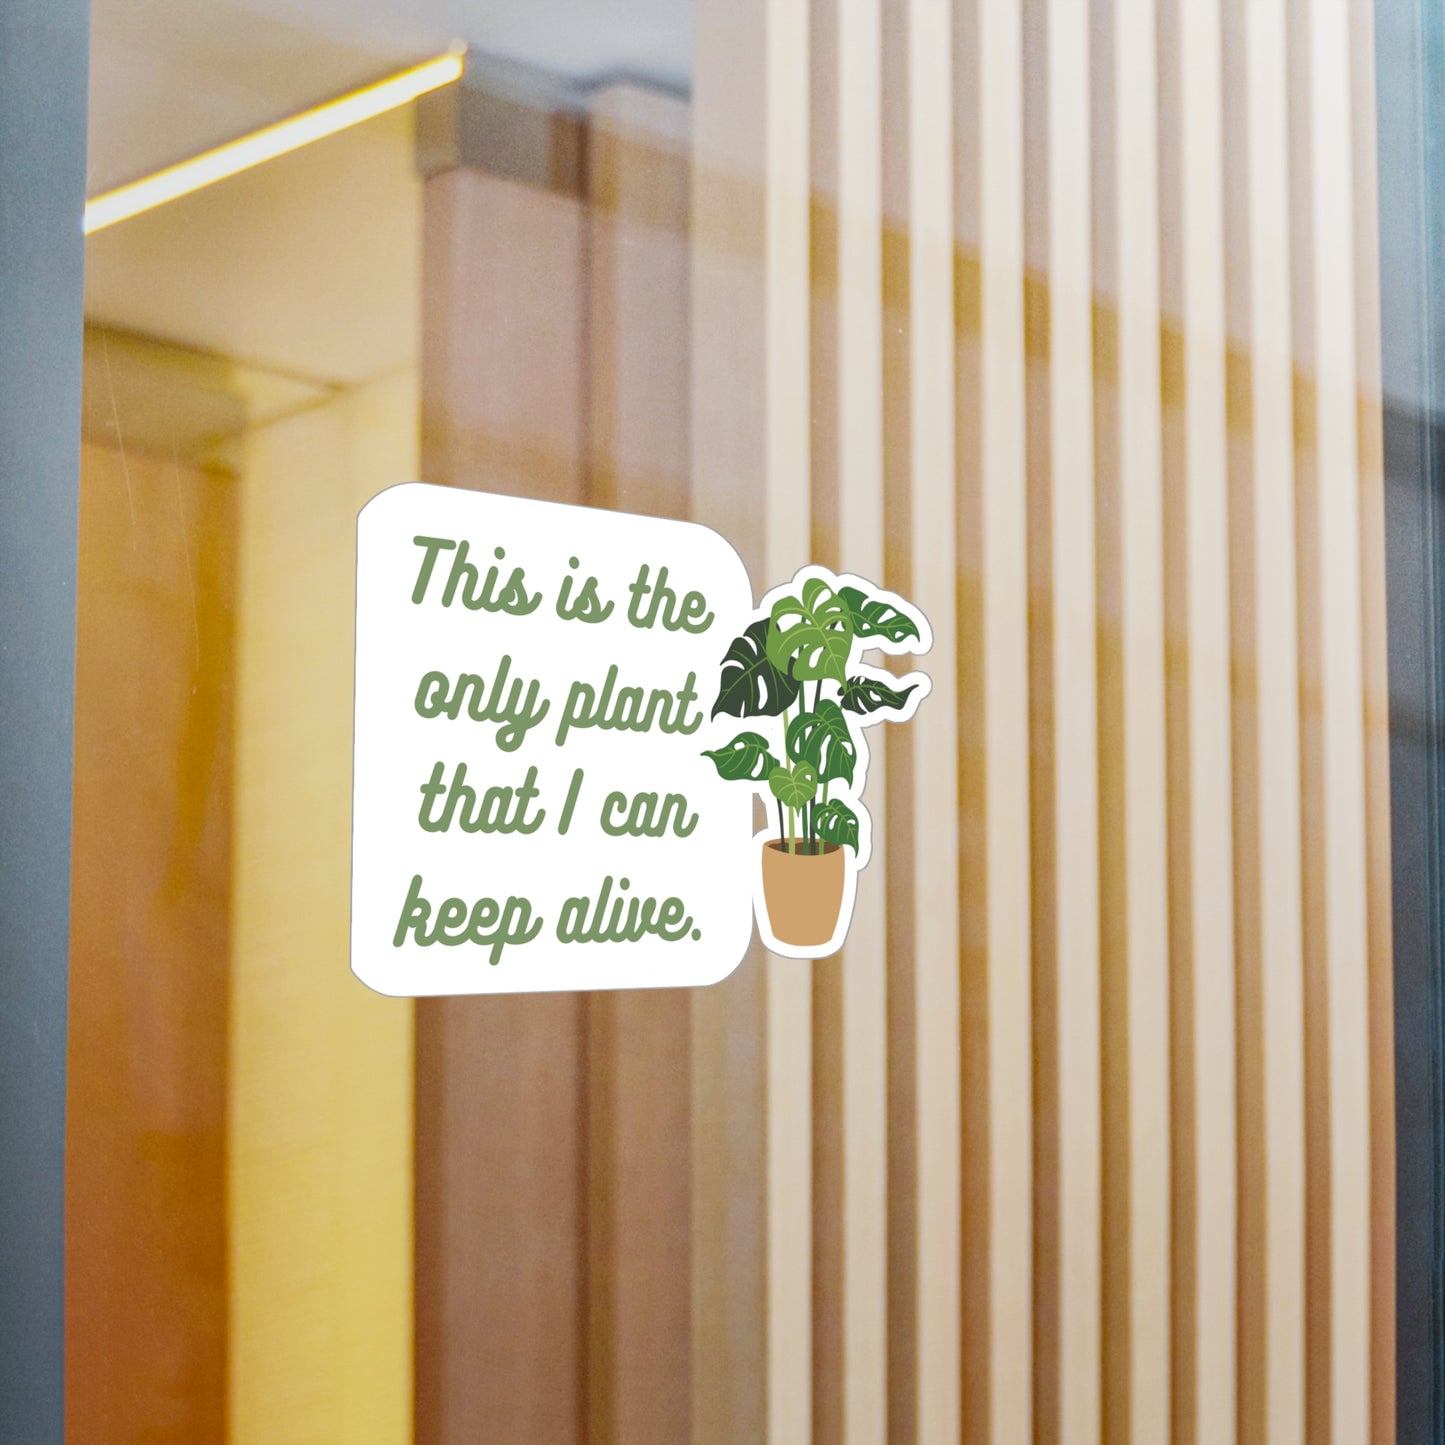 This is the only plant that I can keep alive | Sticker, Plants